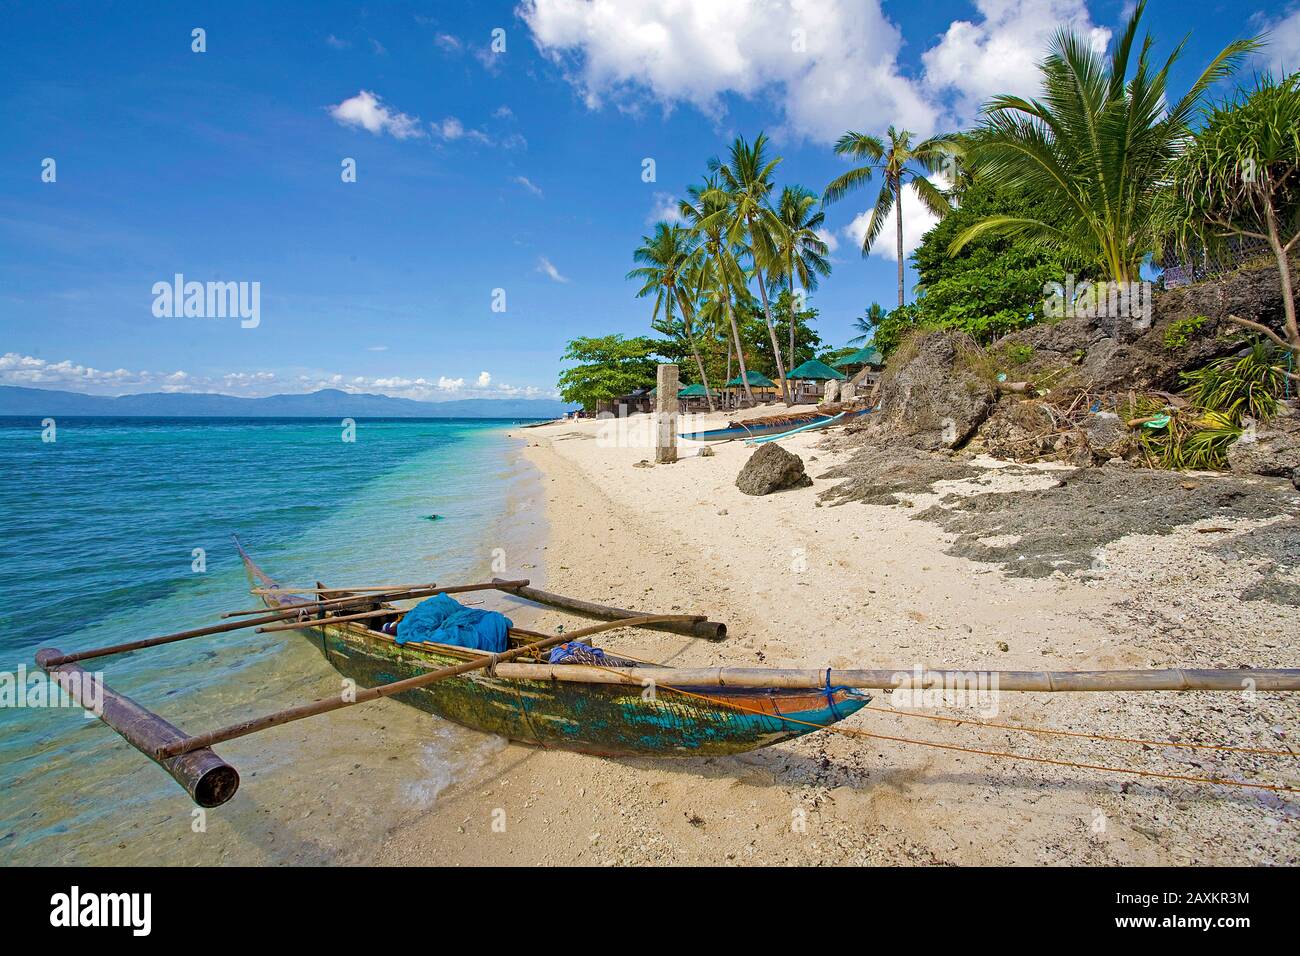 Kleines Auslegerboot am White Beach, Moalboal, Cebu, Philippinen | Small outrigger boat at White beach, Moalboal, Cebu, Philippines Stock Photo